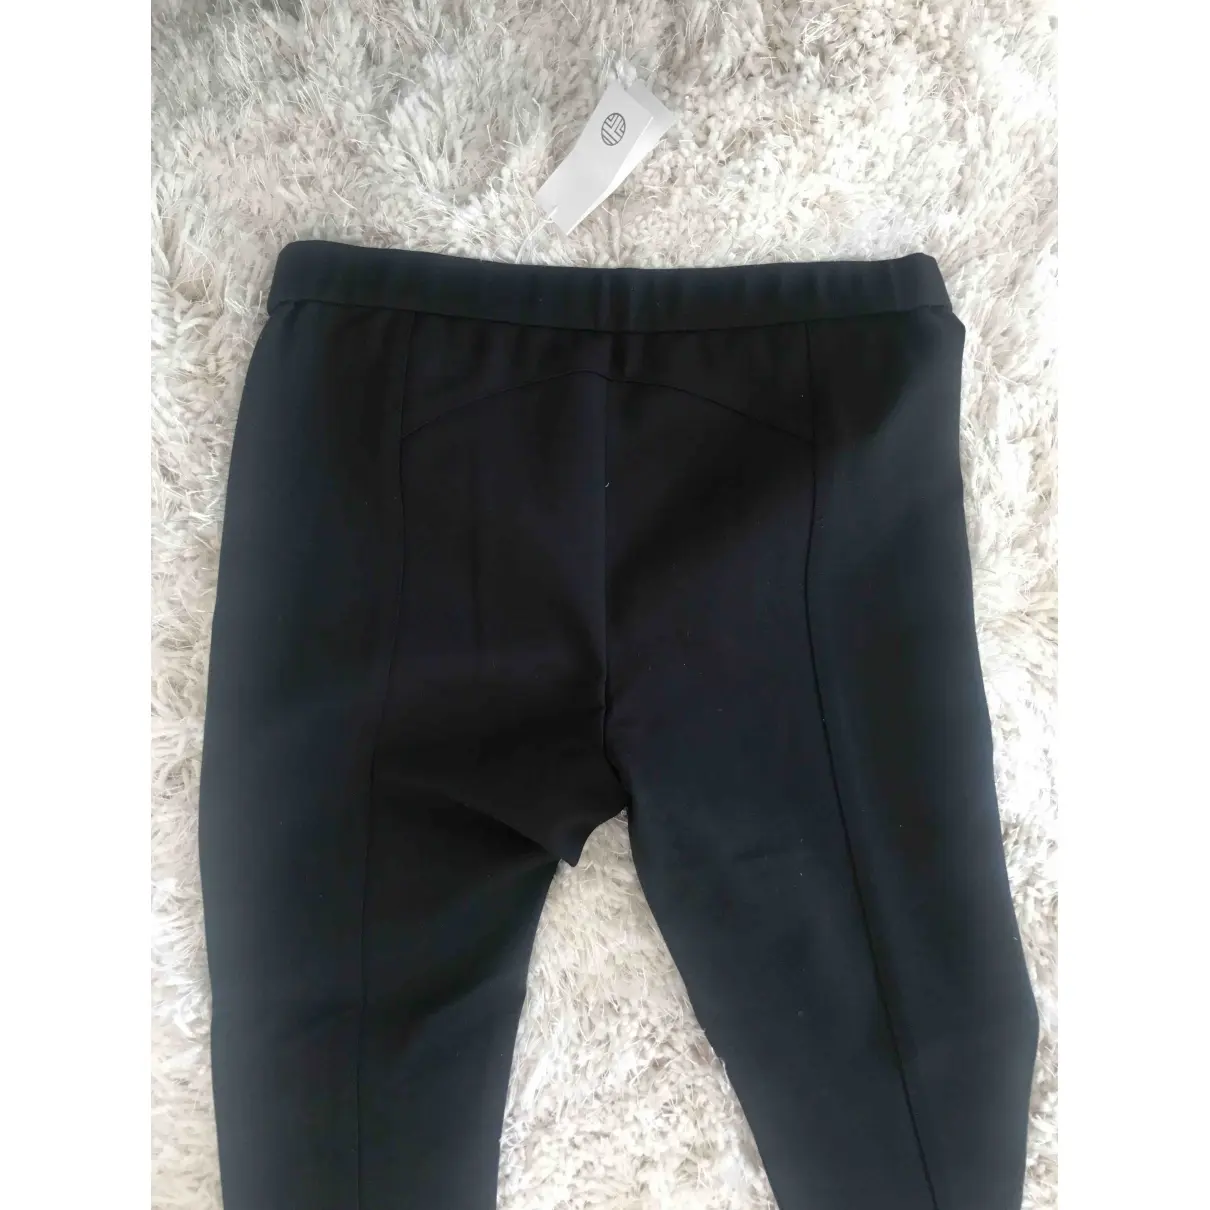 Tory Sport Black Synthetic Trousers for sale